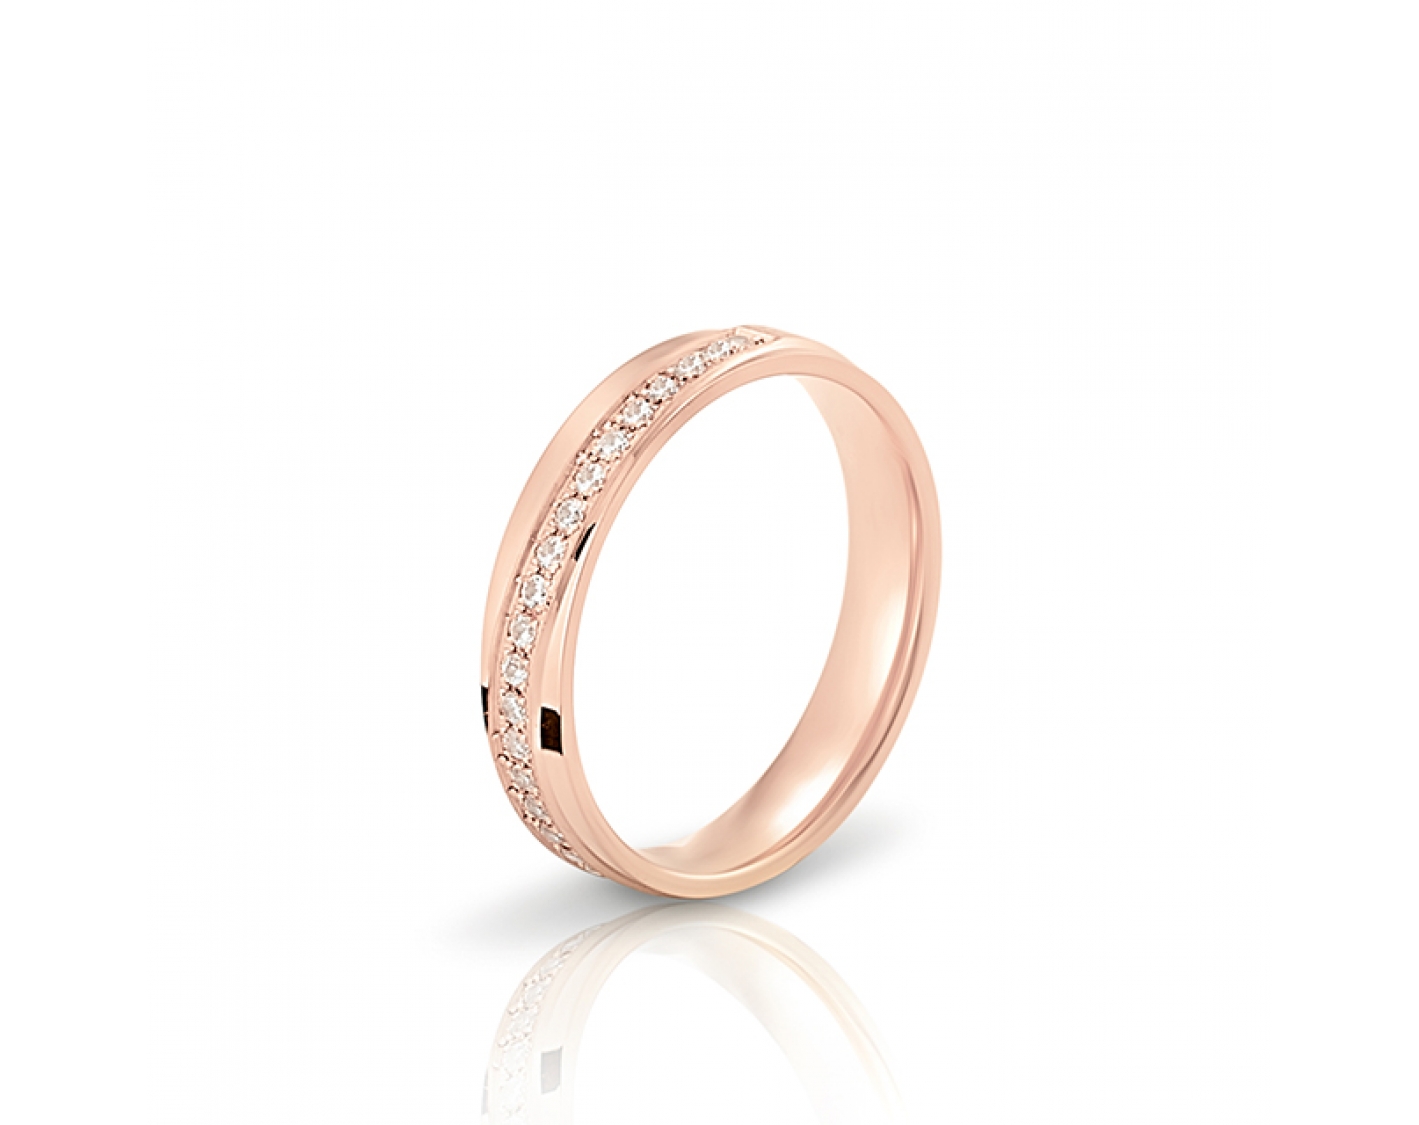 18k rose gold 4mm wedding band half setted with diamonds Photos & images